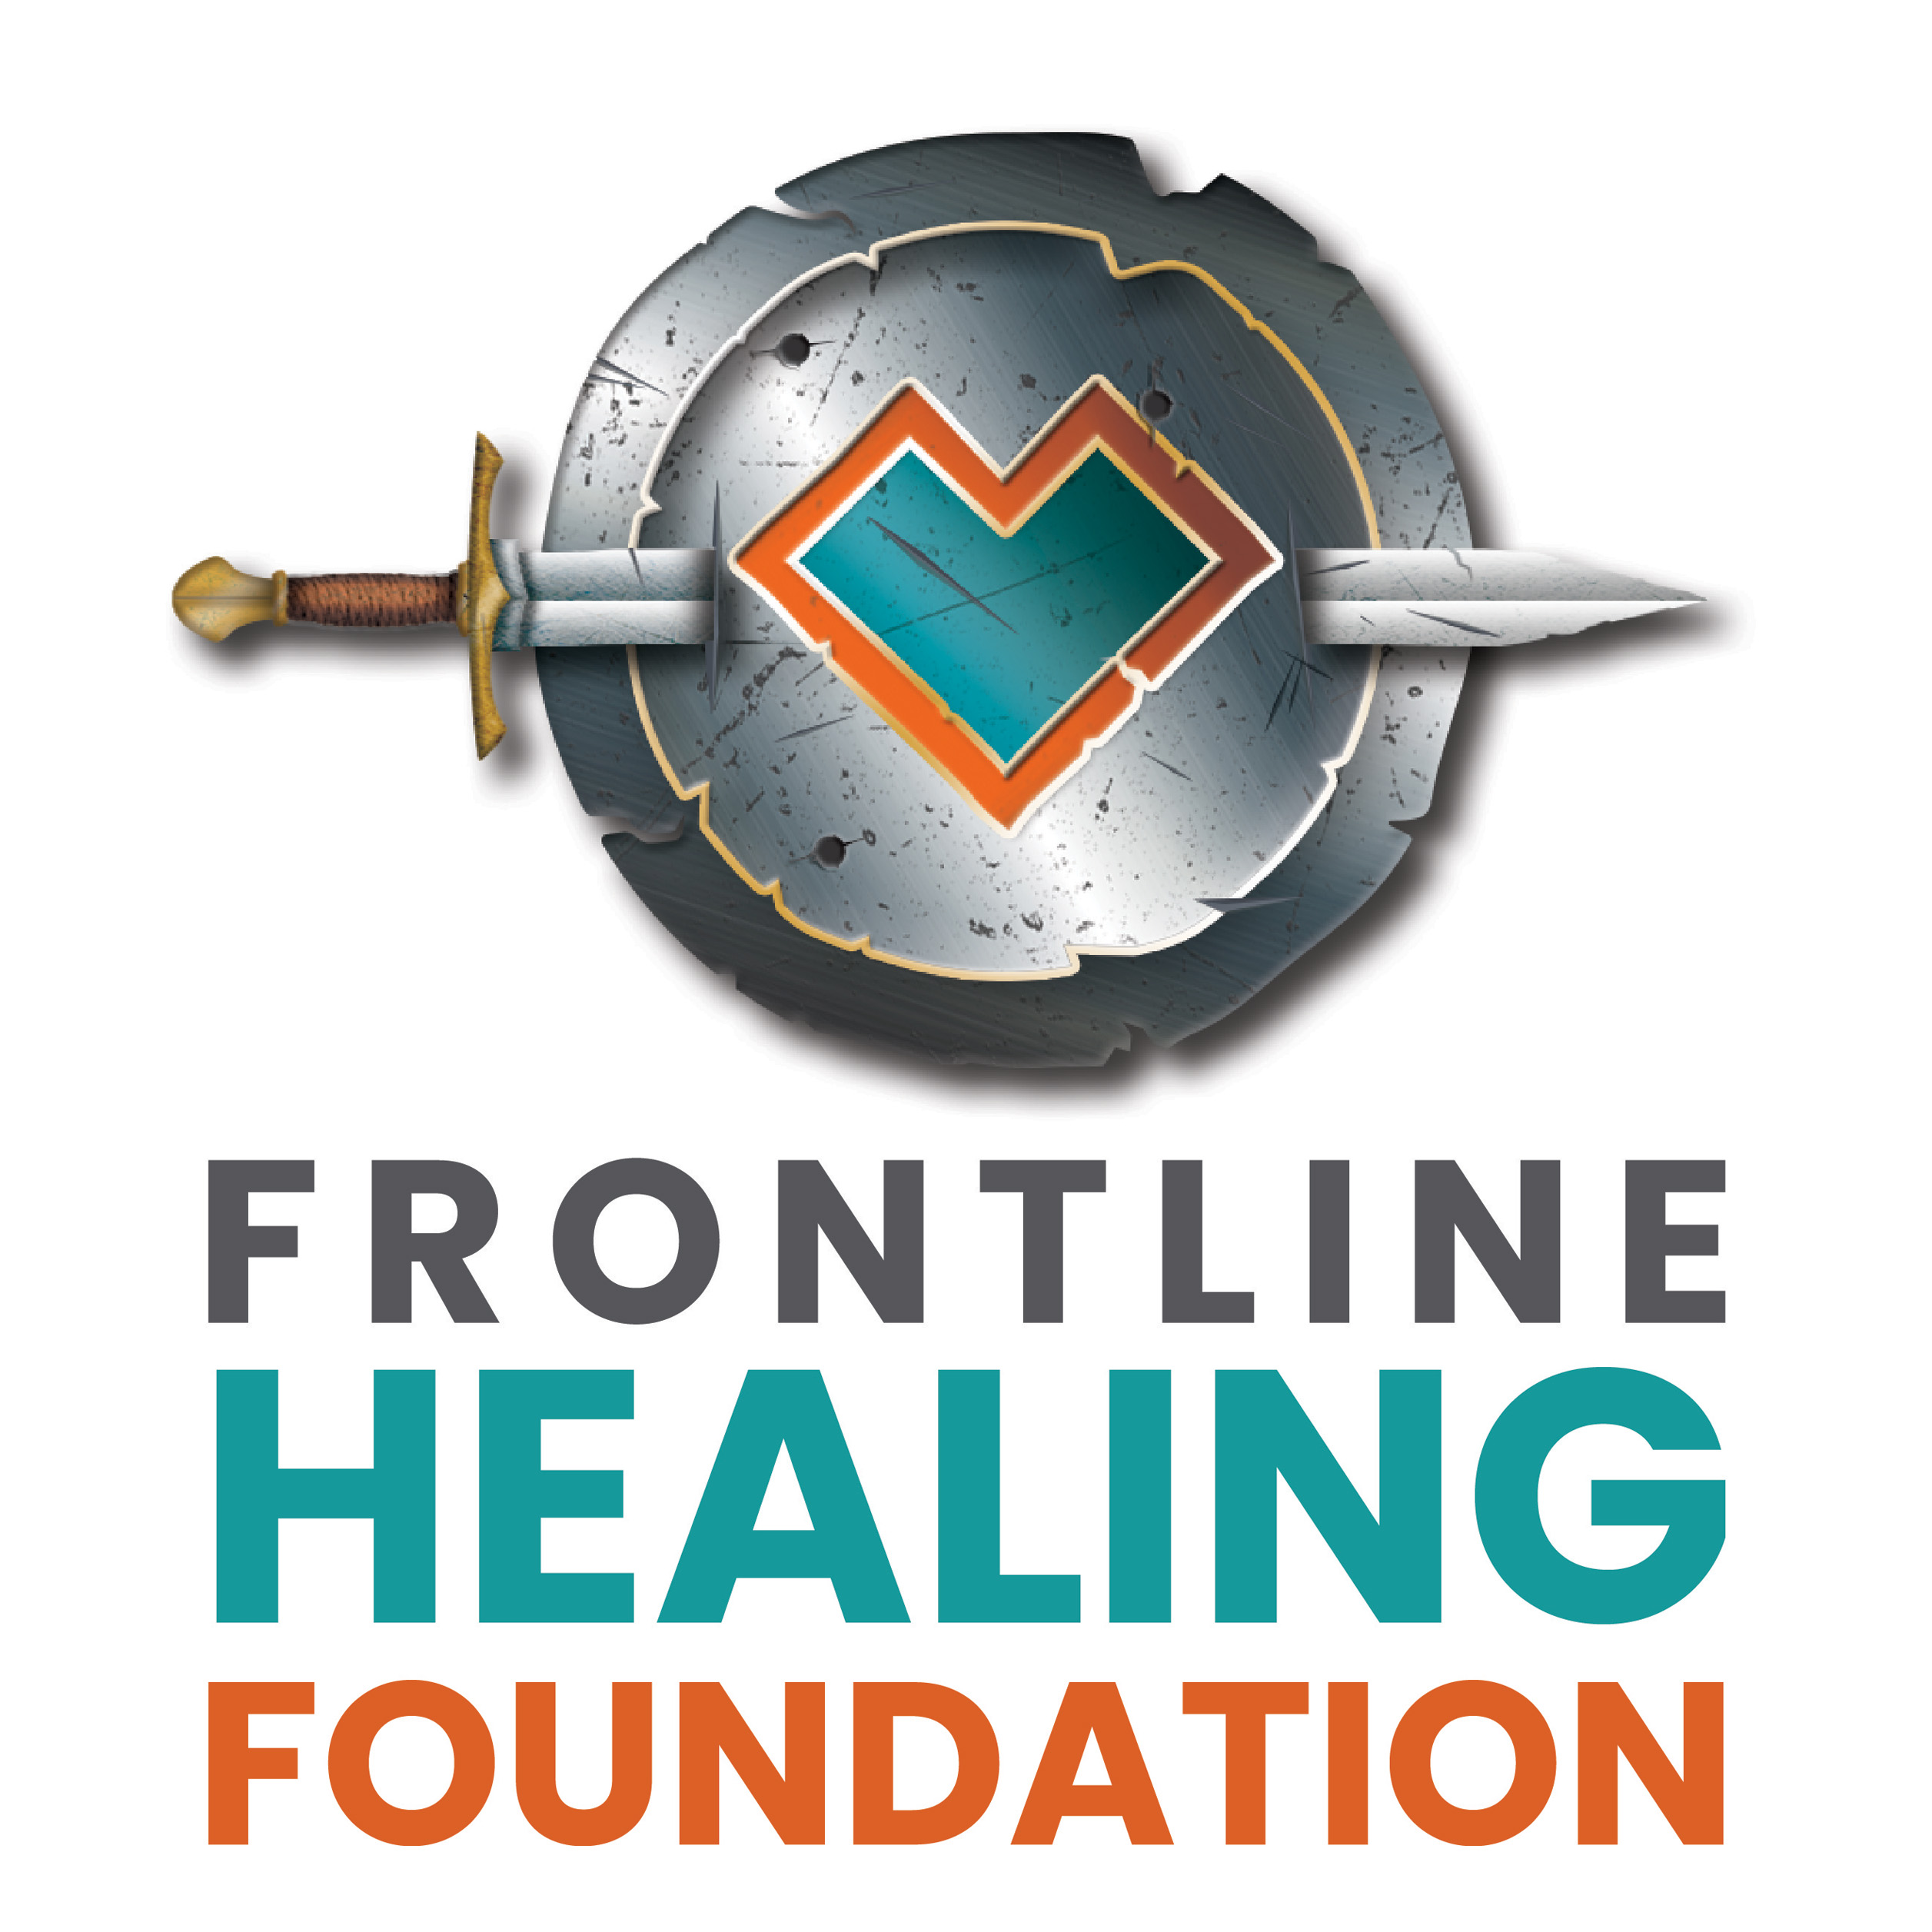 The Frontline Healing Foundation will host their First Annual Warriors Picnic fundraiser in partnership with Operation Song on Saturday, July 29, 2023, at the Dog & Pony Grill.